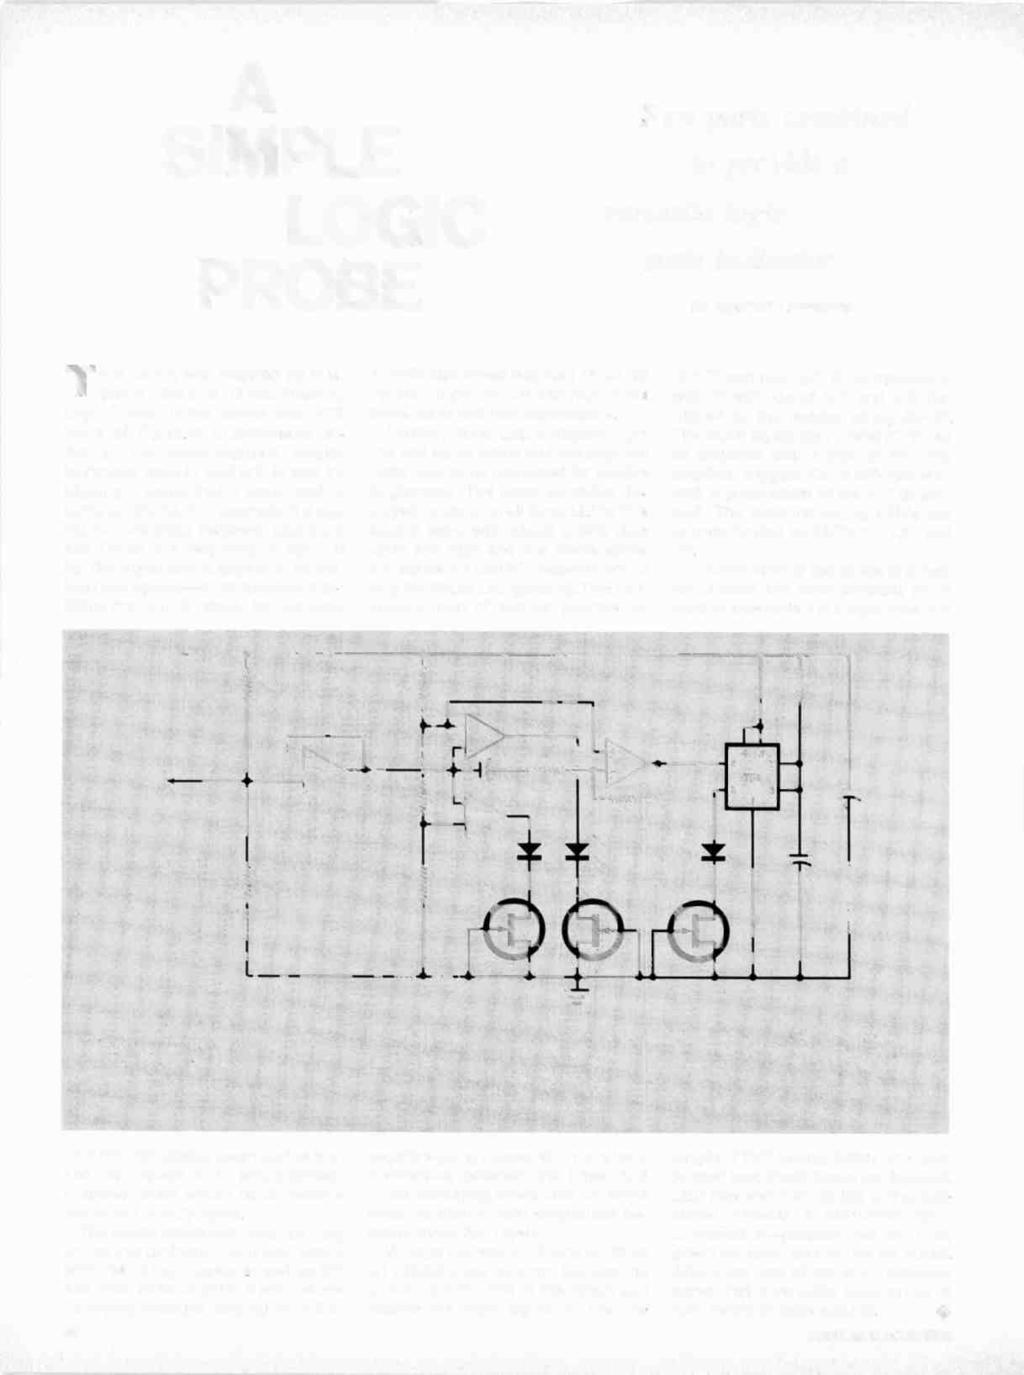 A SIMPLE LOGIC PROBE Few parts combined to provide a versatile logic state indicator. BY ROBERT LEFFERTS HIS circuit was inspired by R.M. Stitt's "Build a Direct Reading Logic Probe" in the Steptember 1975 issue Of POPULAR ELECTRONICS.